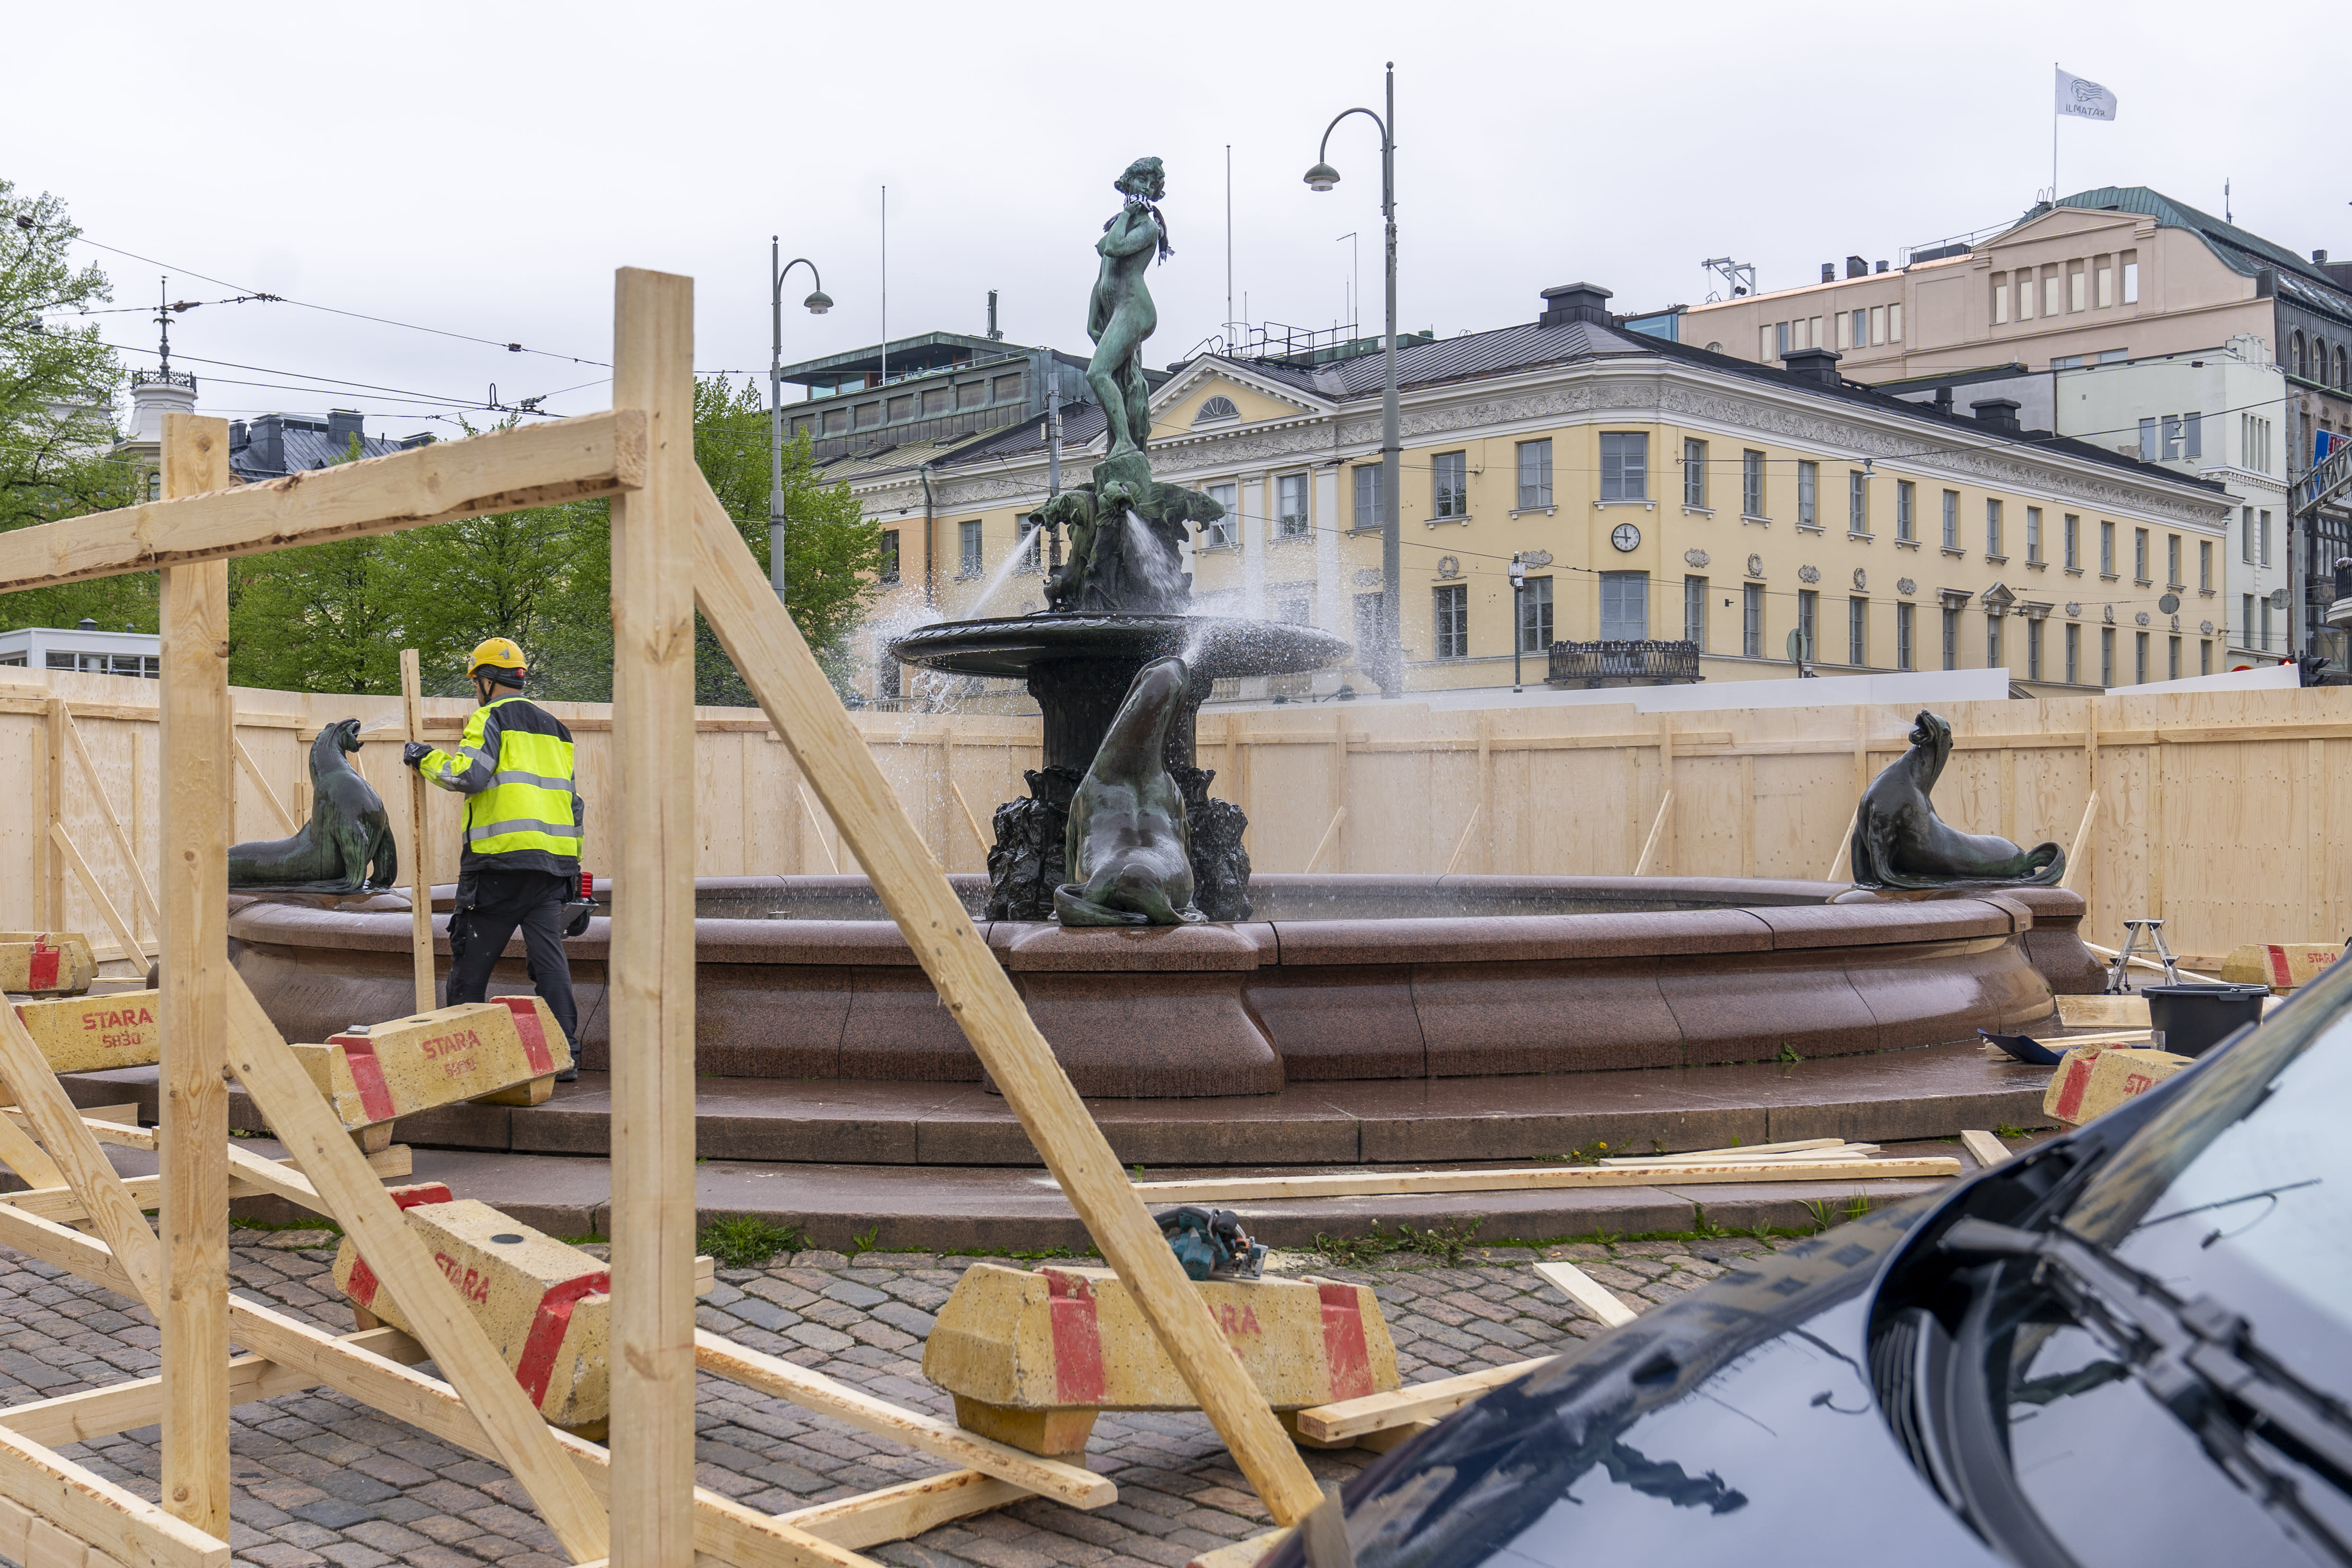 Helsinki’s most iconic statue for rest and a facelift